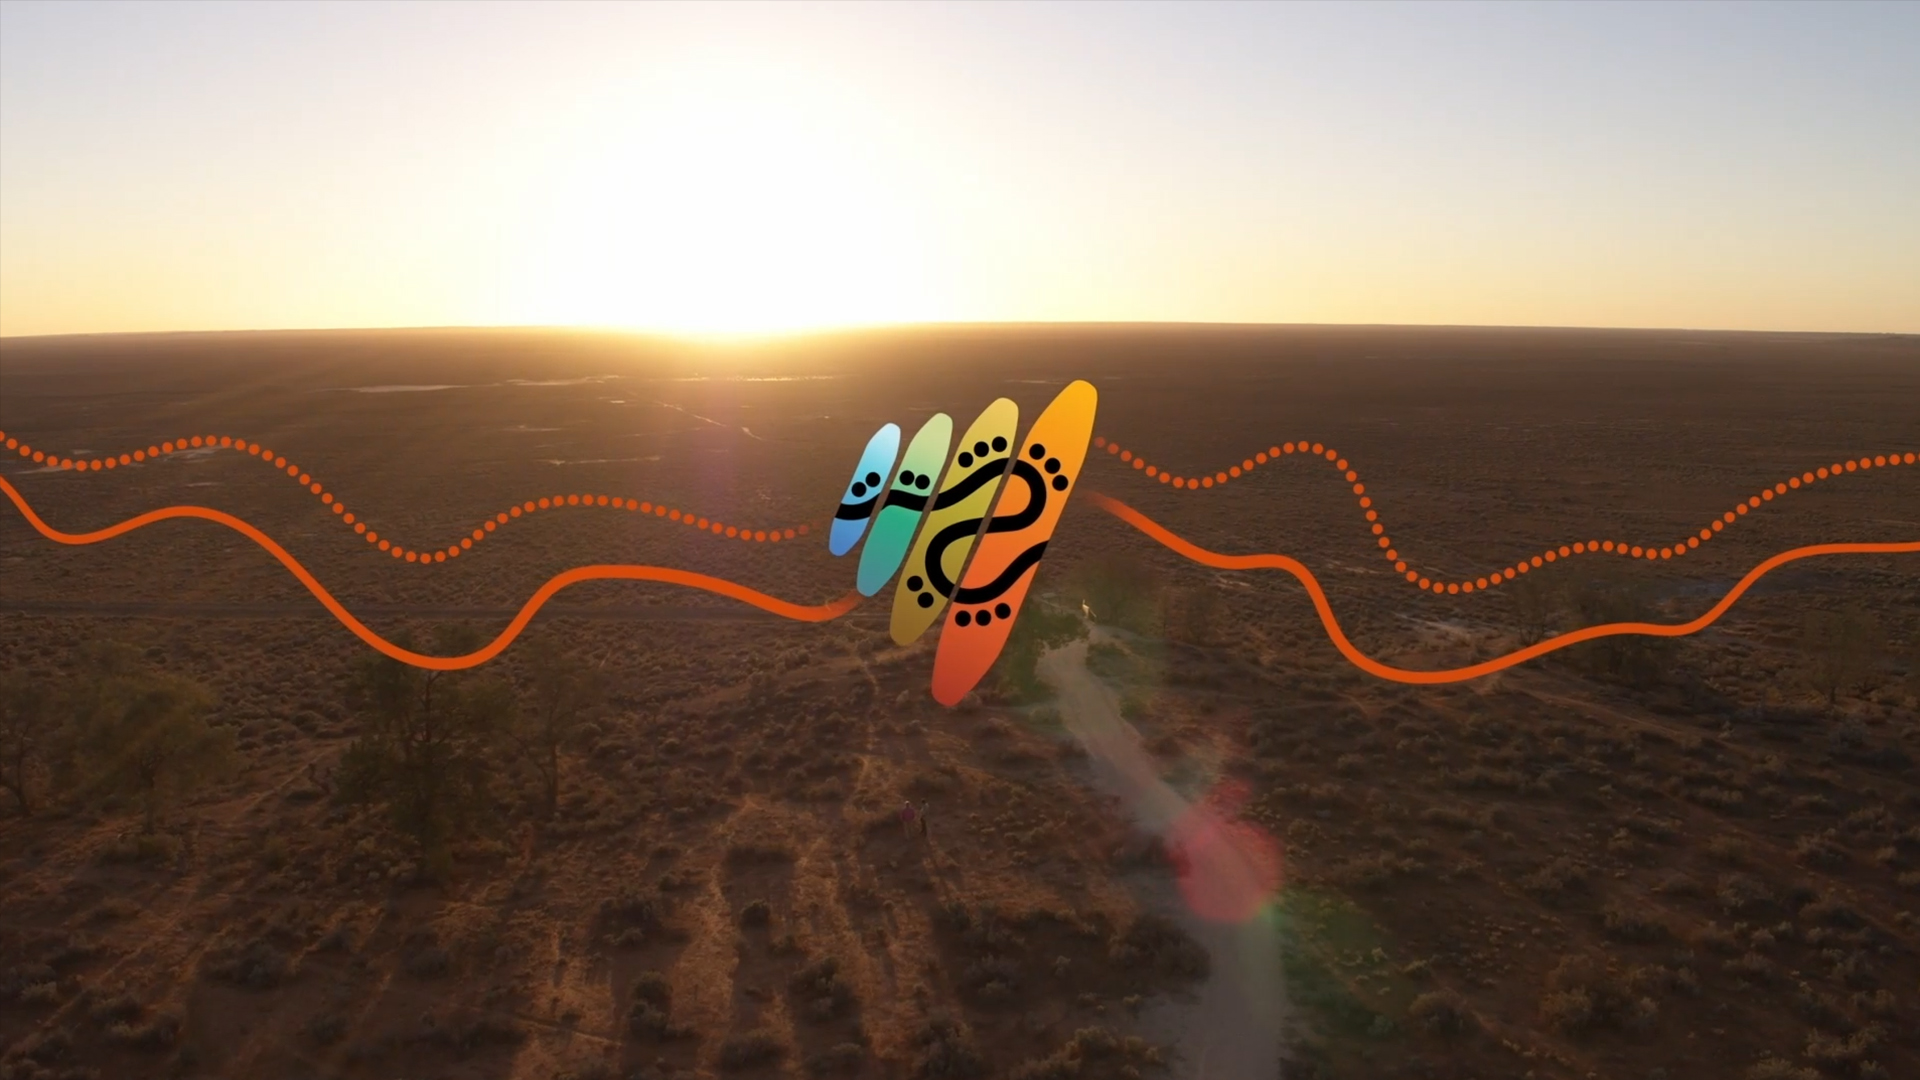 Bilma, or clapstick, logo for NITV's rebrand created by VANDAL in conjunction with First Nations creative agency Gilimbaa - TVC still featuring the new logo overlaid on desert sand using motion graphics